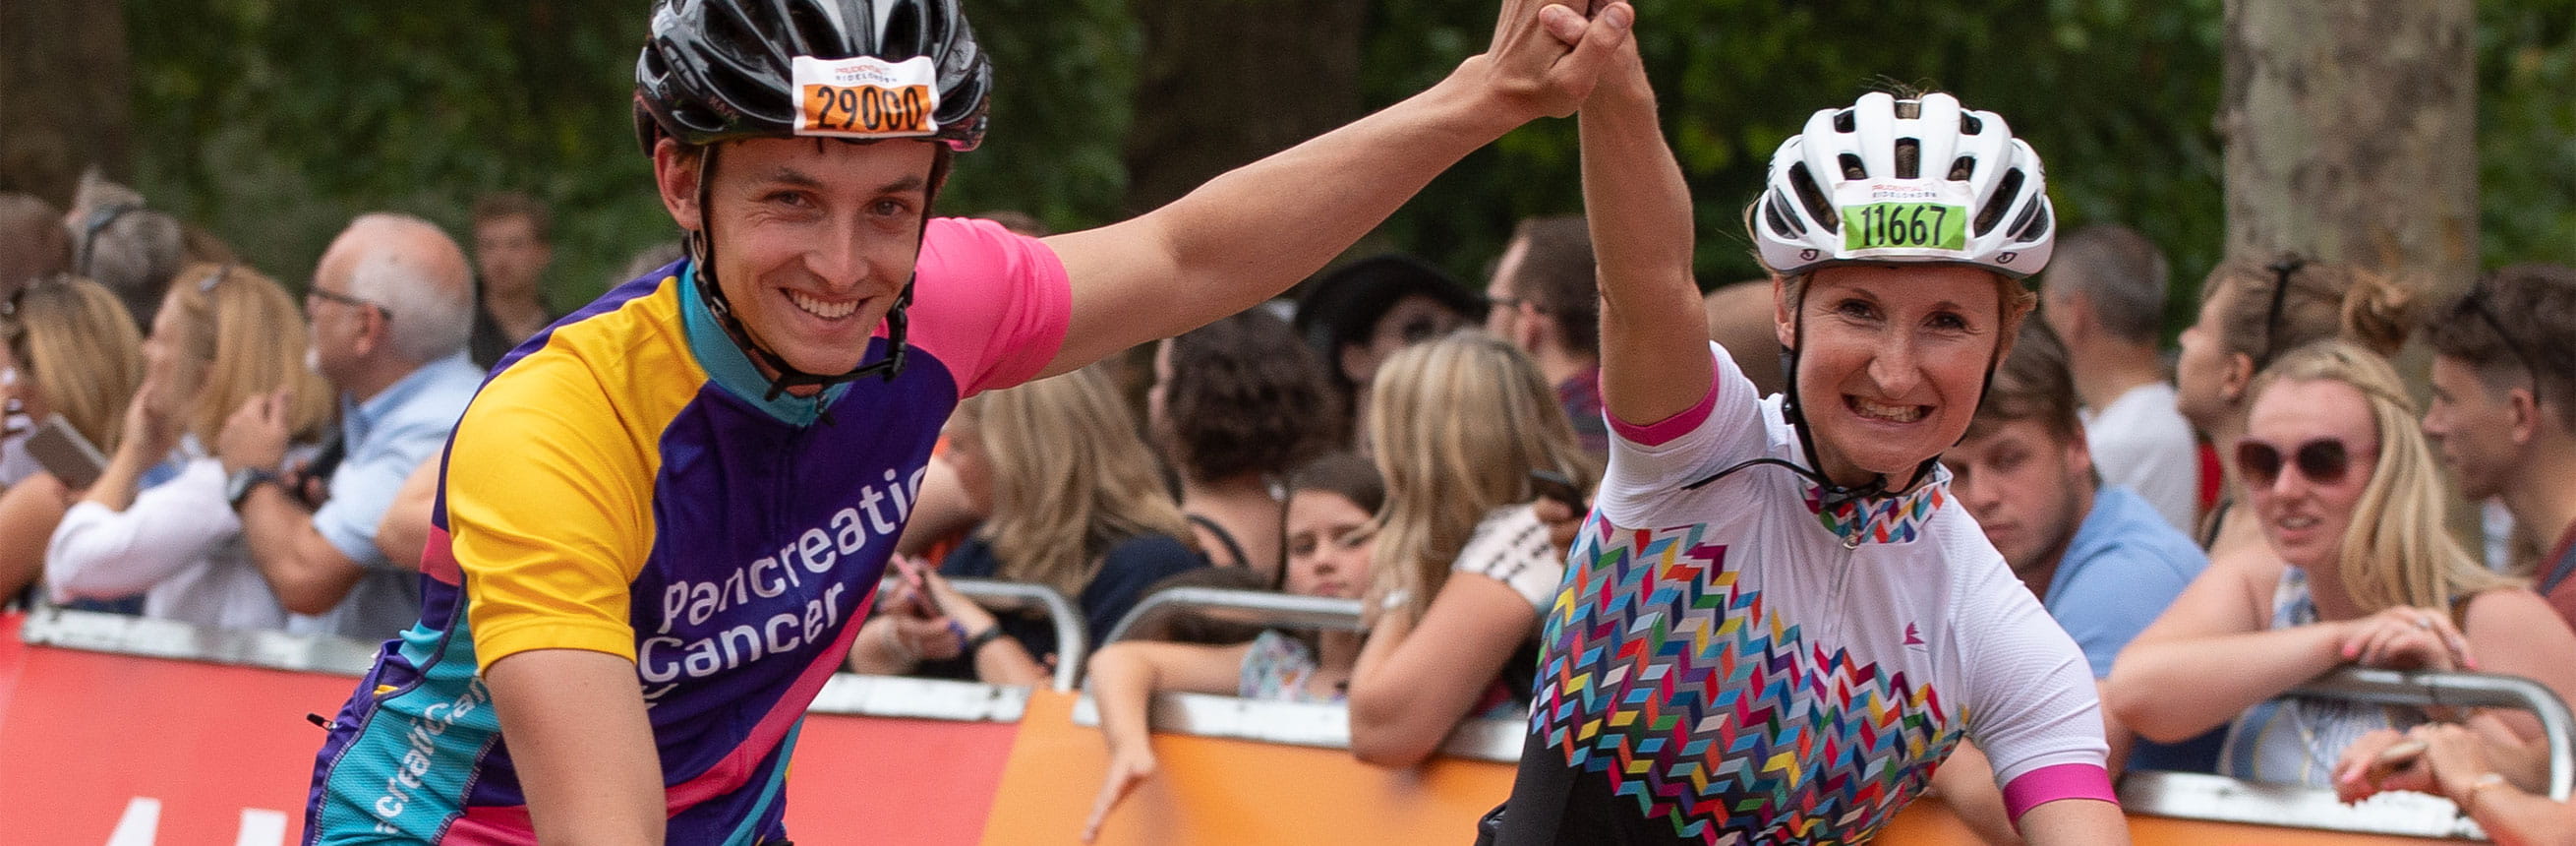 Cyclists celebrating as they cross the finish line at the end of the The RideLondon Sportives